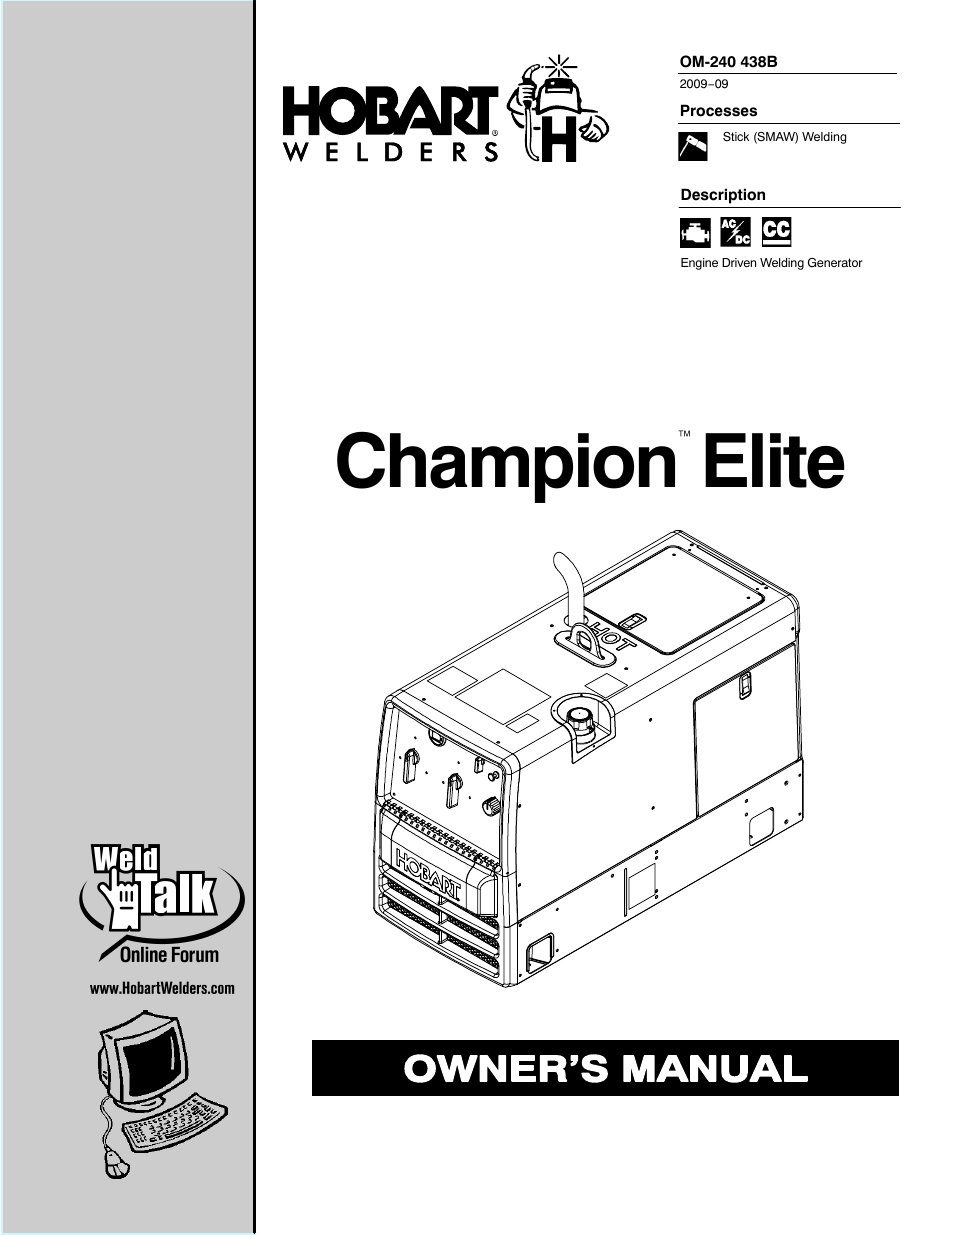 Hobart Welding Products CHAMPION ELITE OM-240 438B User Manual | 72 pages